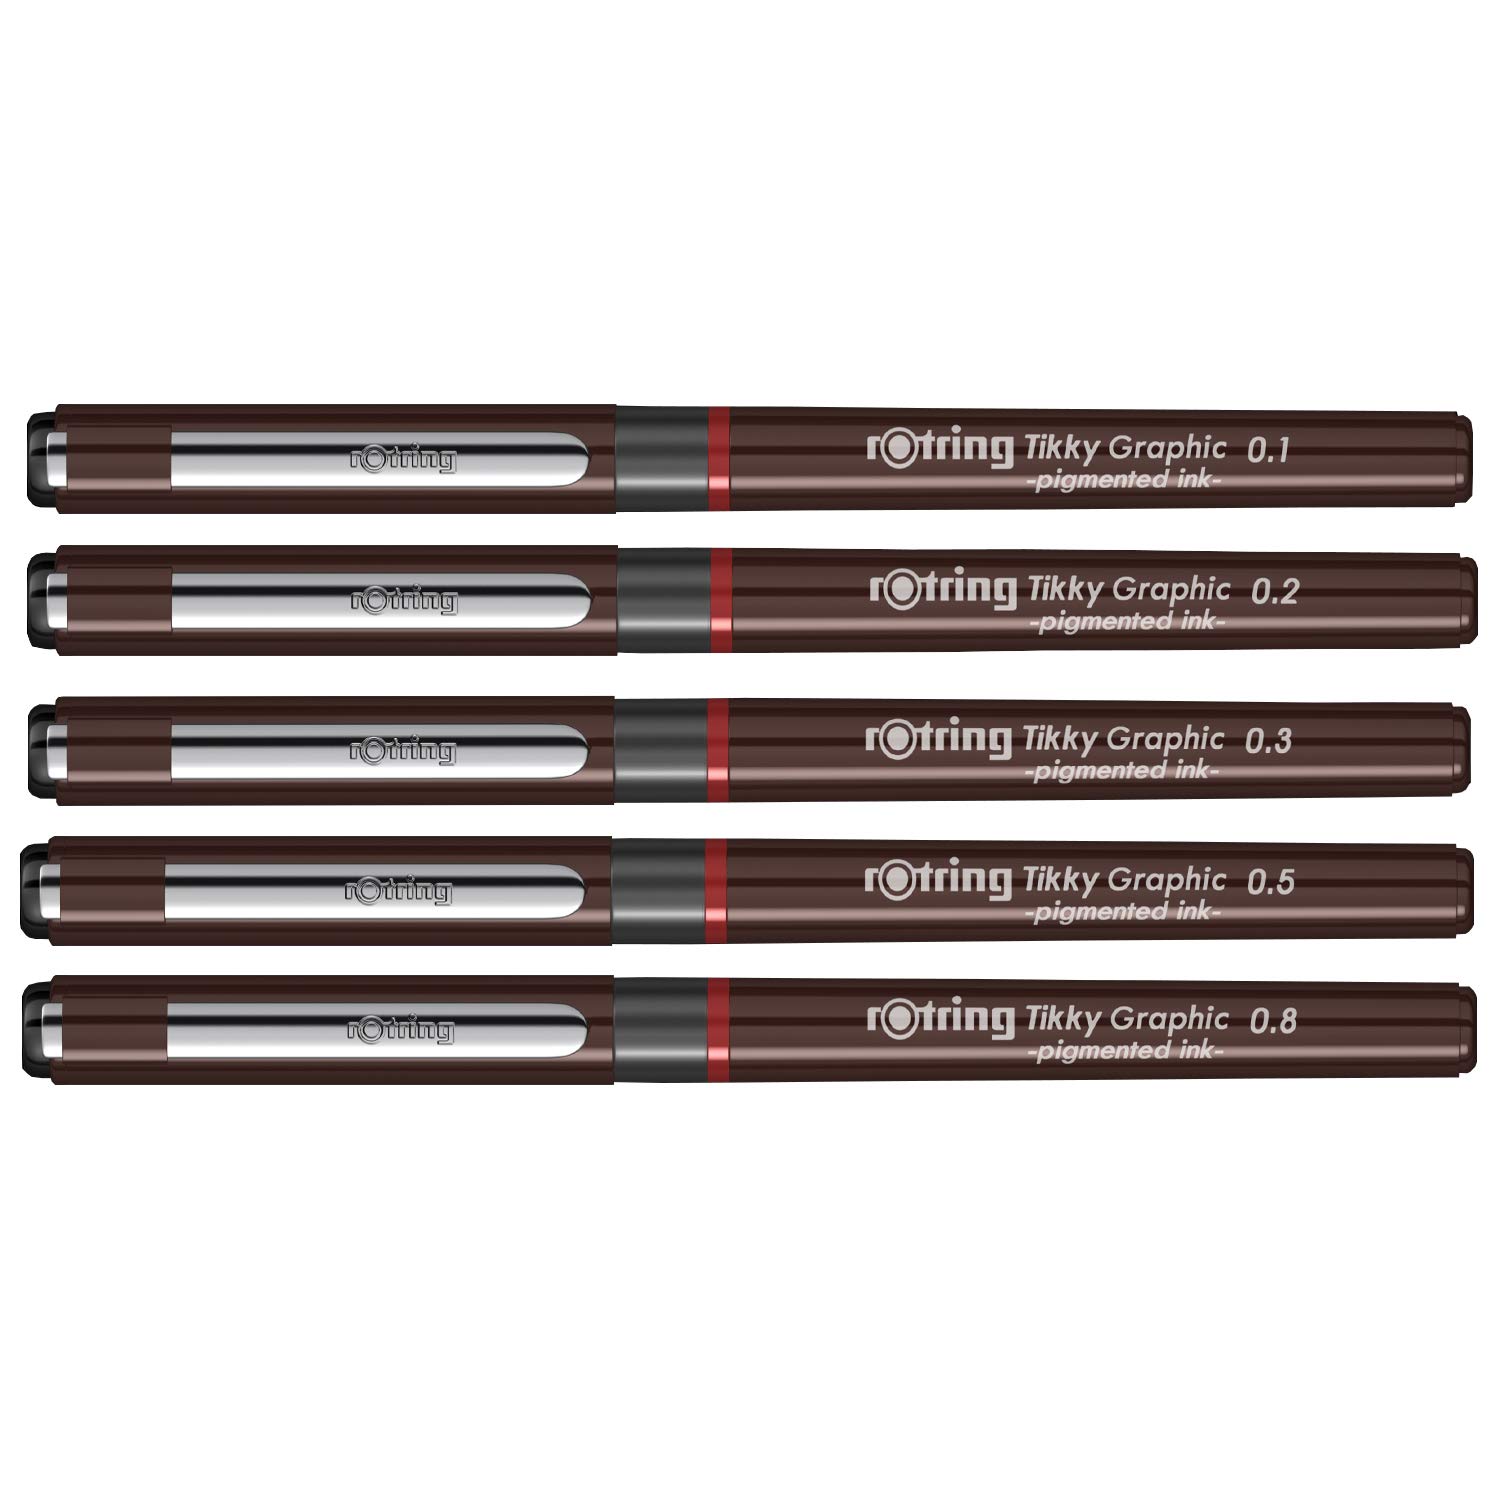 Rotring Tikky Graphic - Pigment Liner - Technical Drawing Pen Fibre Tip  Fineliner Pen Black Ink - 0.1/0.2/0.3/0.4/0.5/0.7/0.8mm - AliExpress